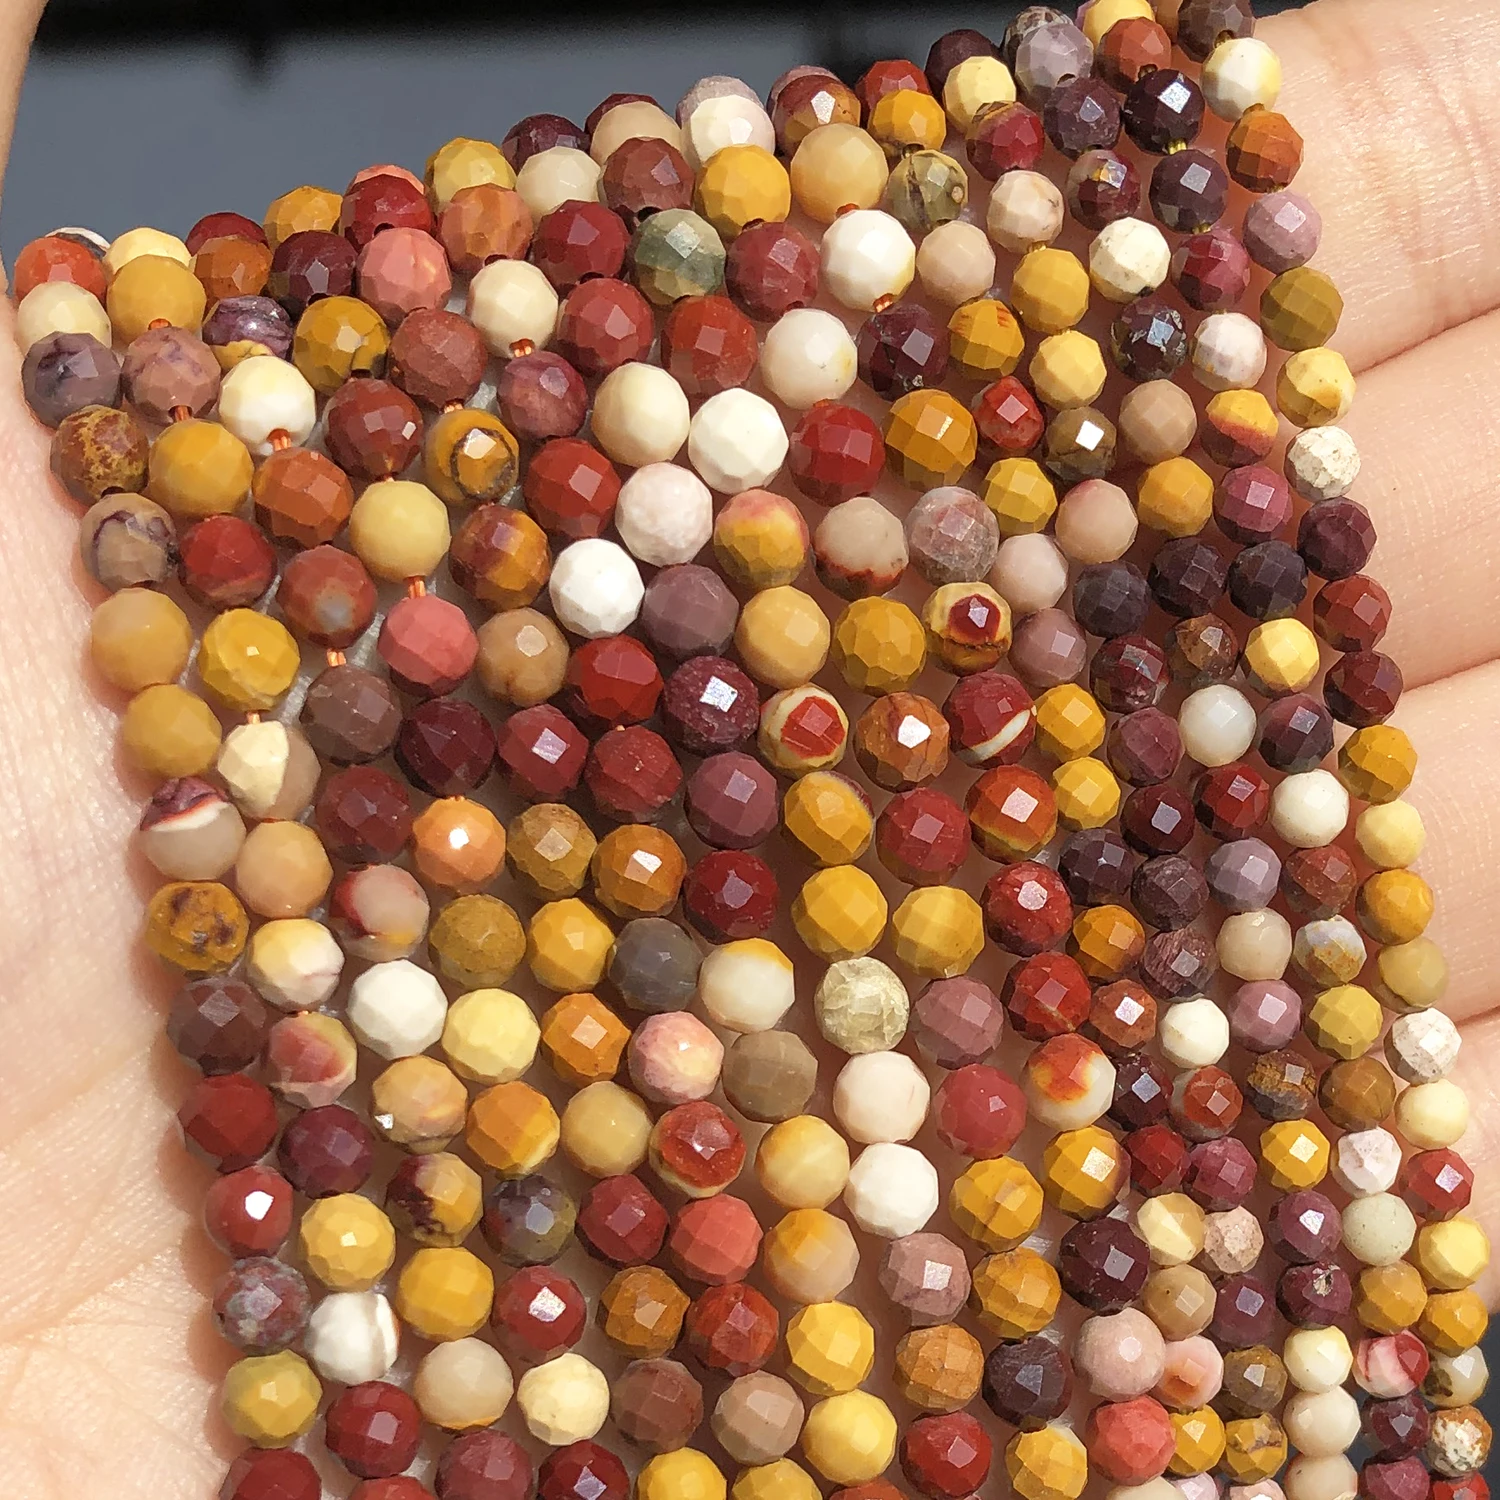 

Natural Faceted Colorful Mookaite Gem Stone 3 4mm Loose Spacer Beads for Jewelry DIY Making Bracelet Earrings Accessories 15''